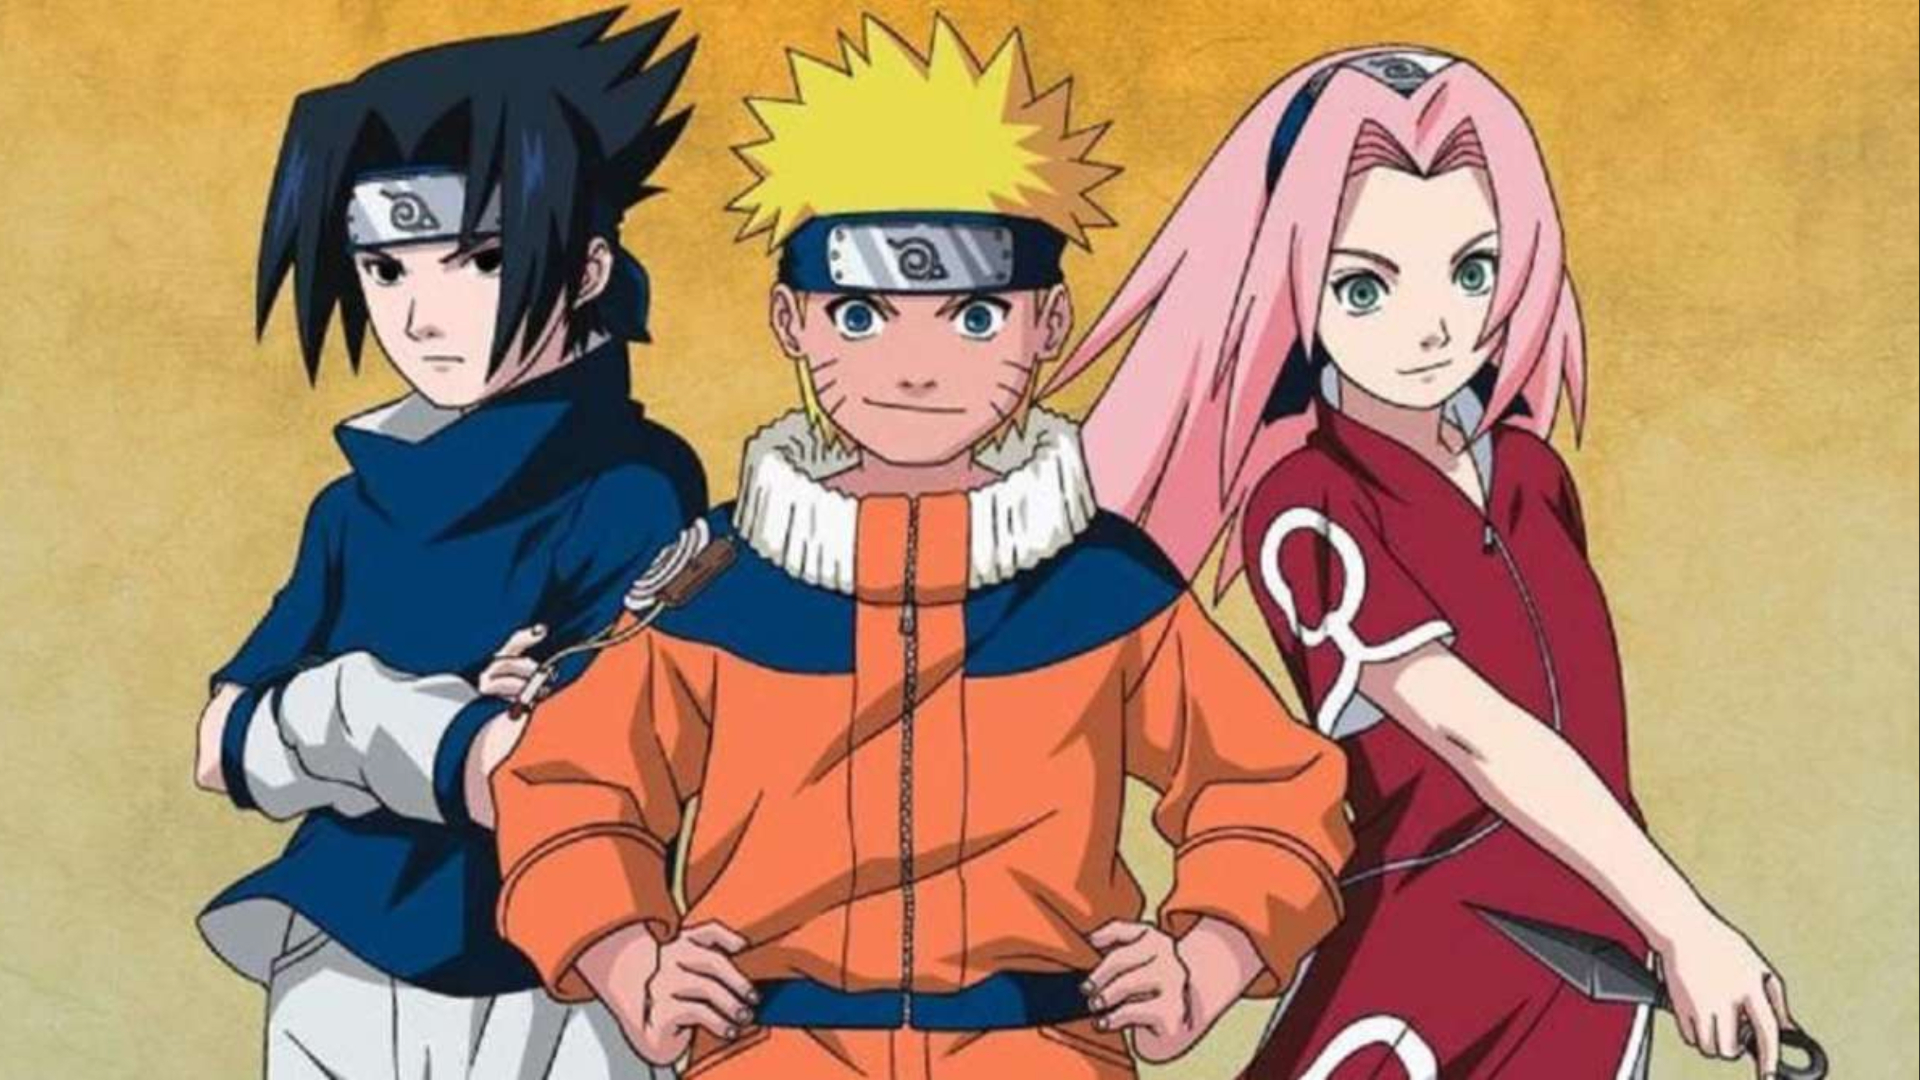 The Day Naruto Became Hokage (2016): Where to Watch and Stream Online